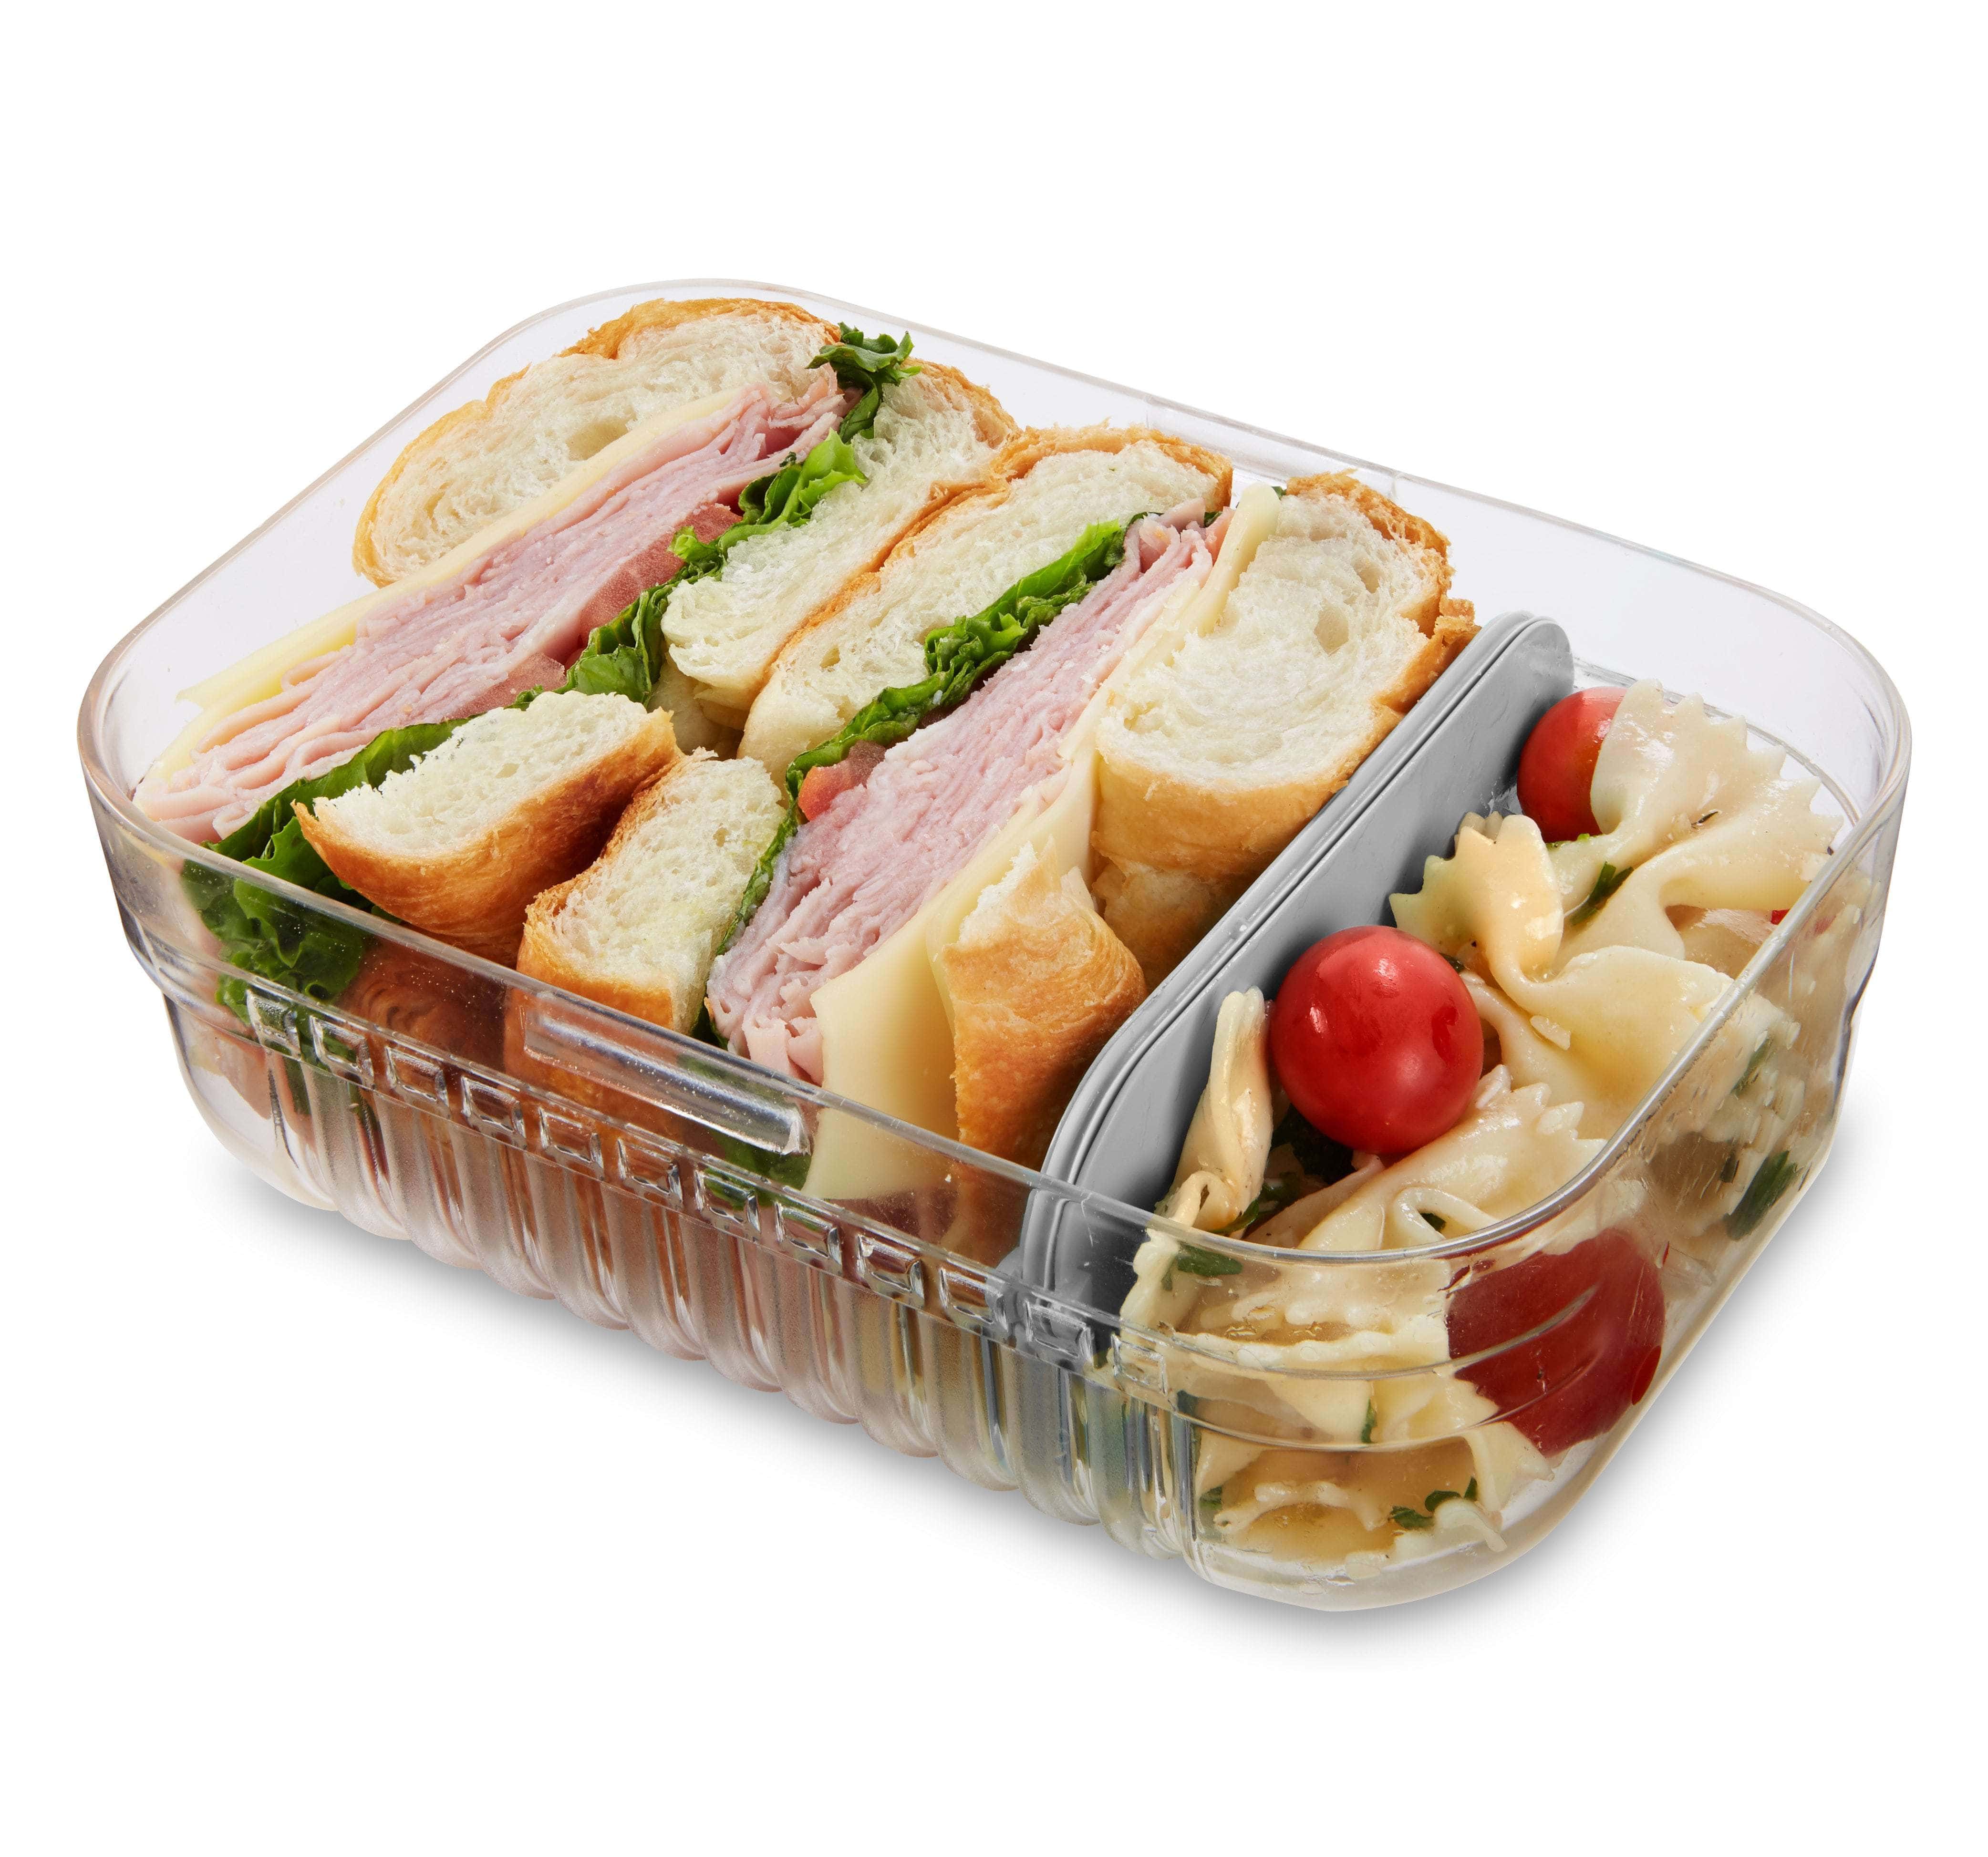 Packit Mod Lunch Bento Container - Steel Gray